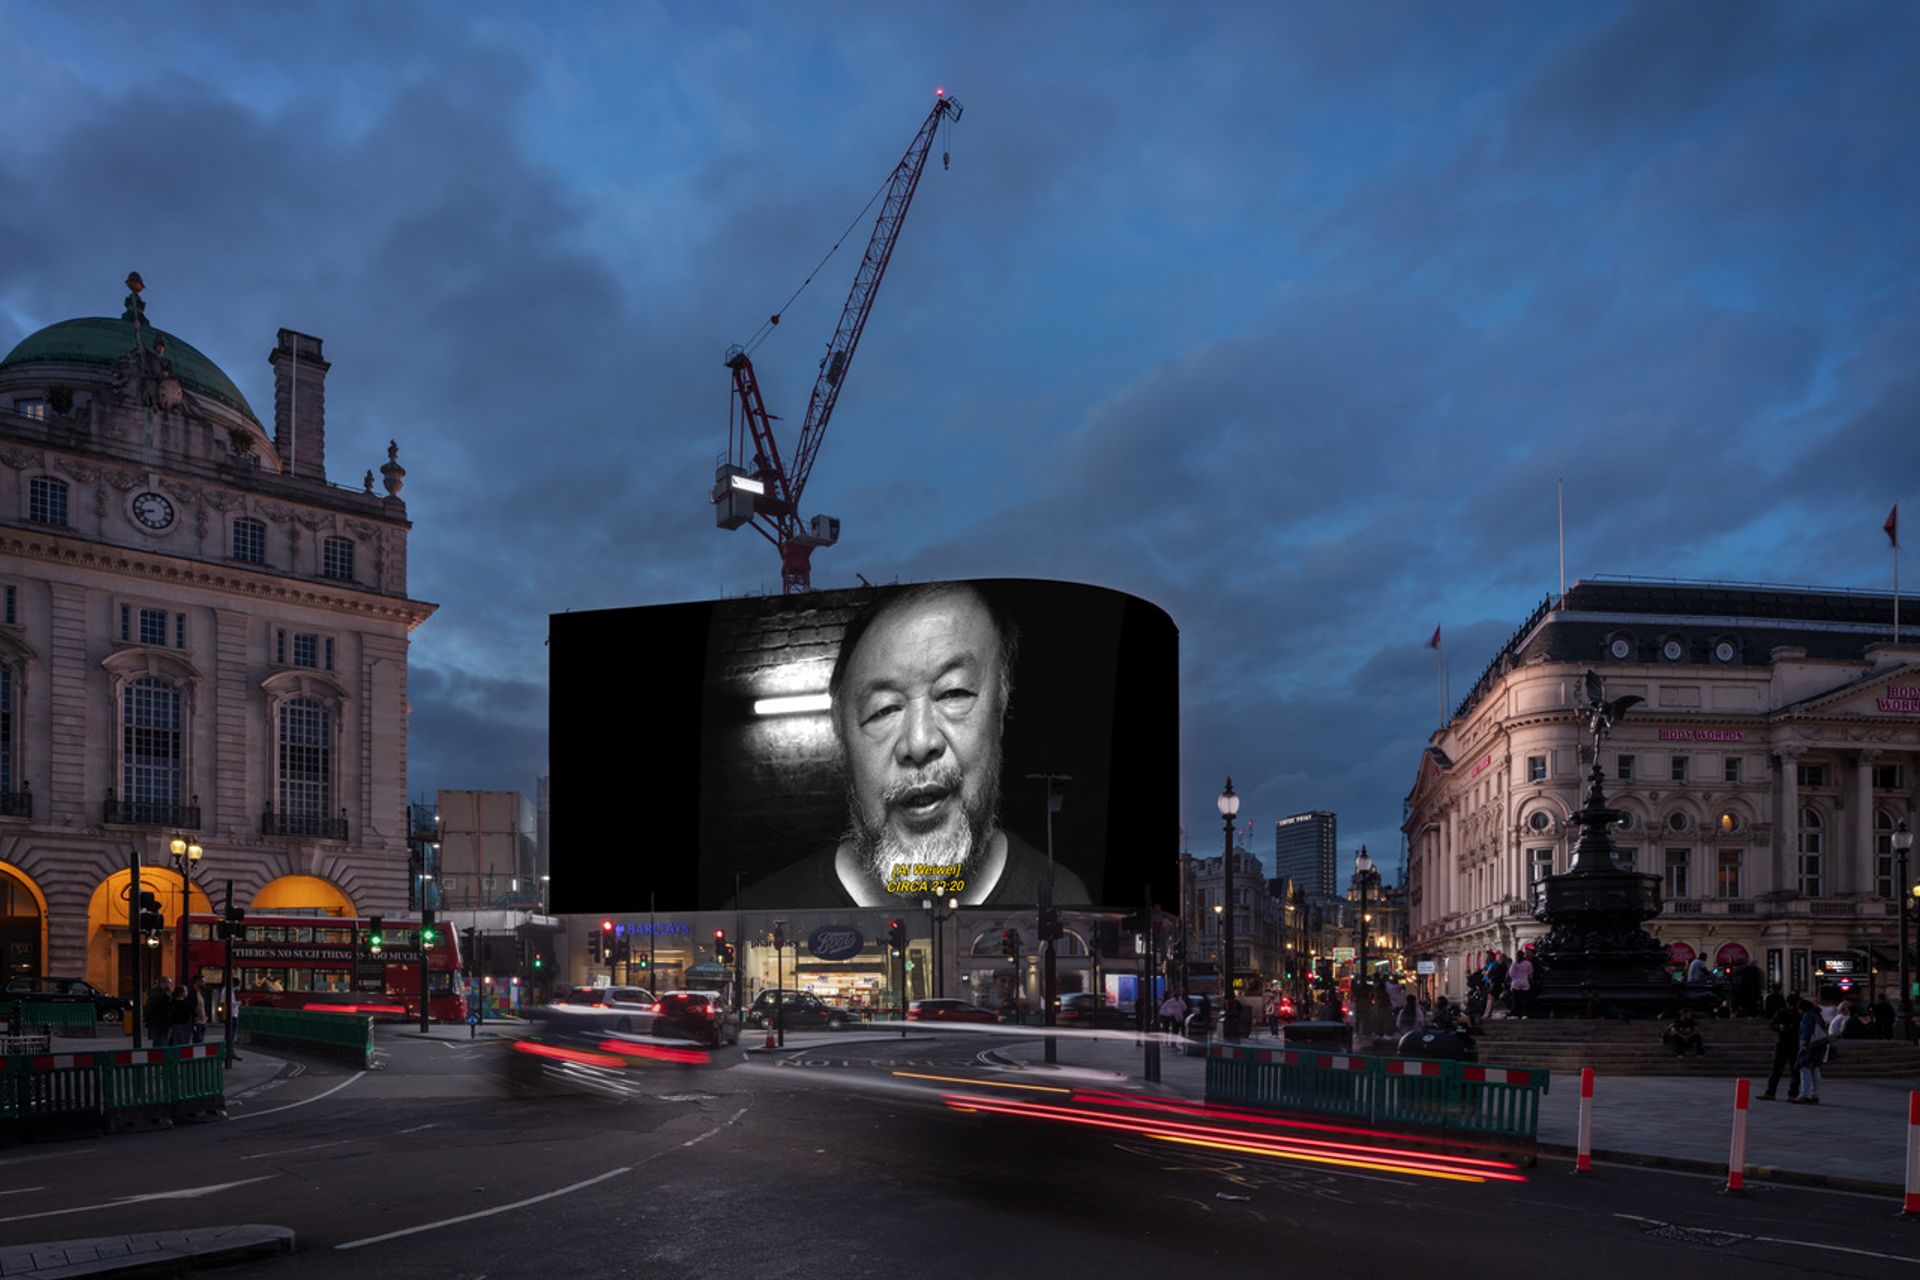 Ai Weiwei's film will appear on a billboard in London's Picadilly Circus next month Photo: Marcus Peel